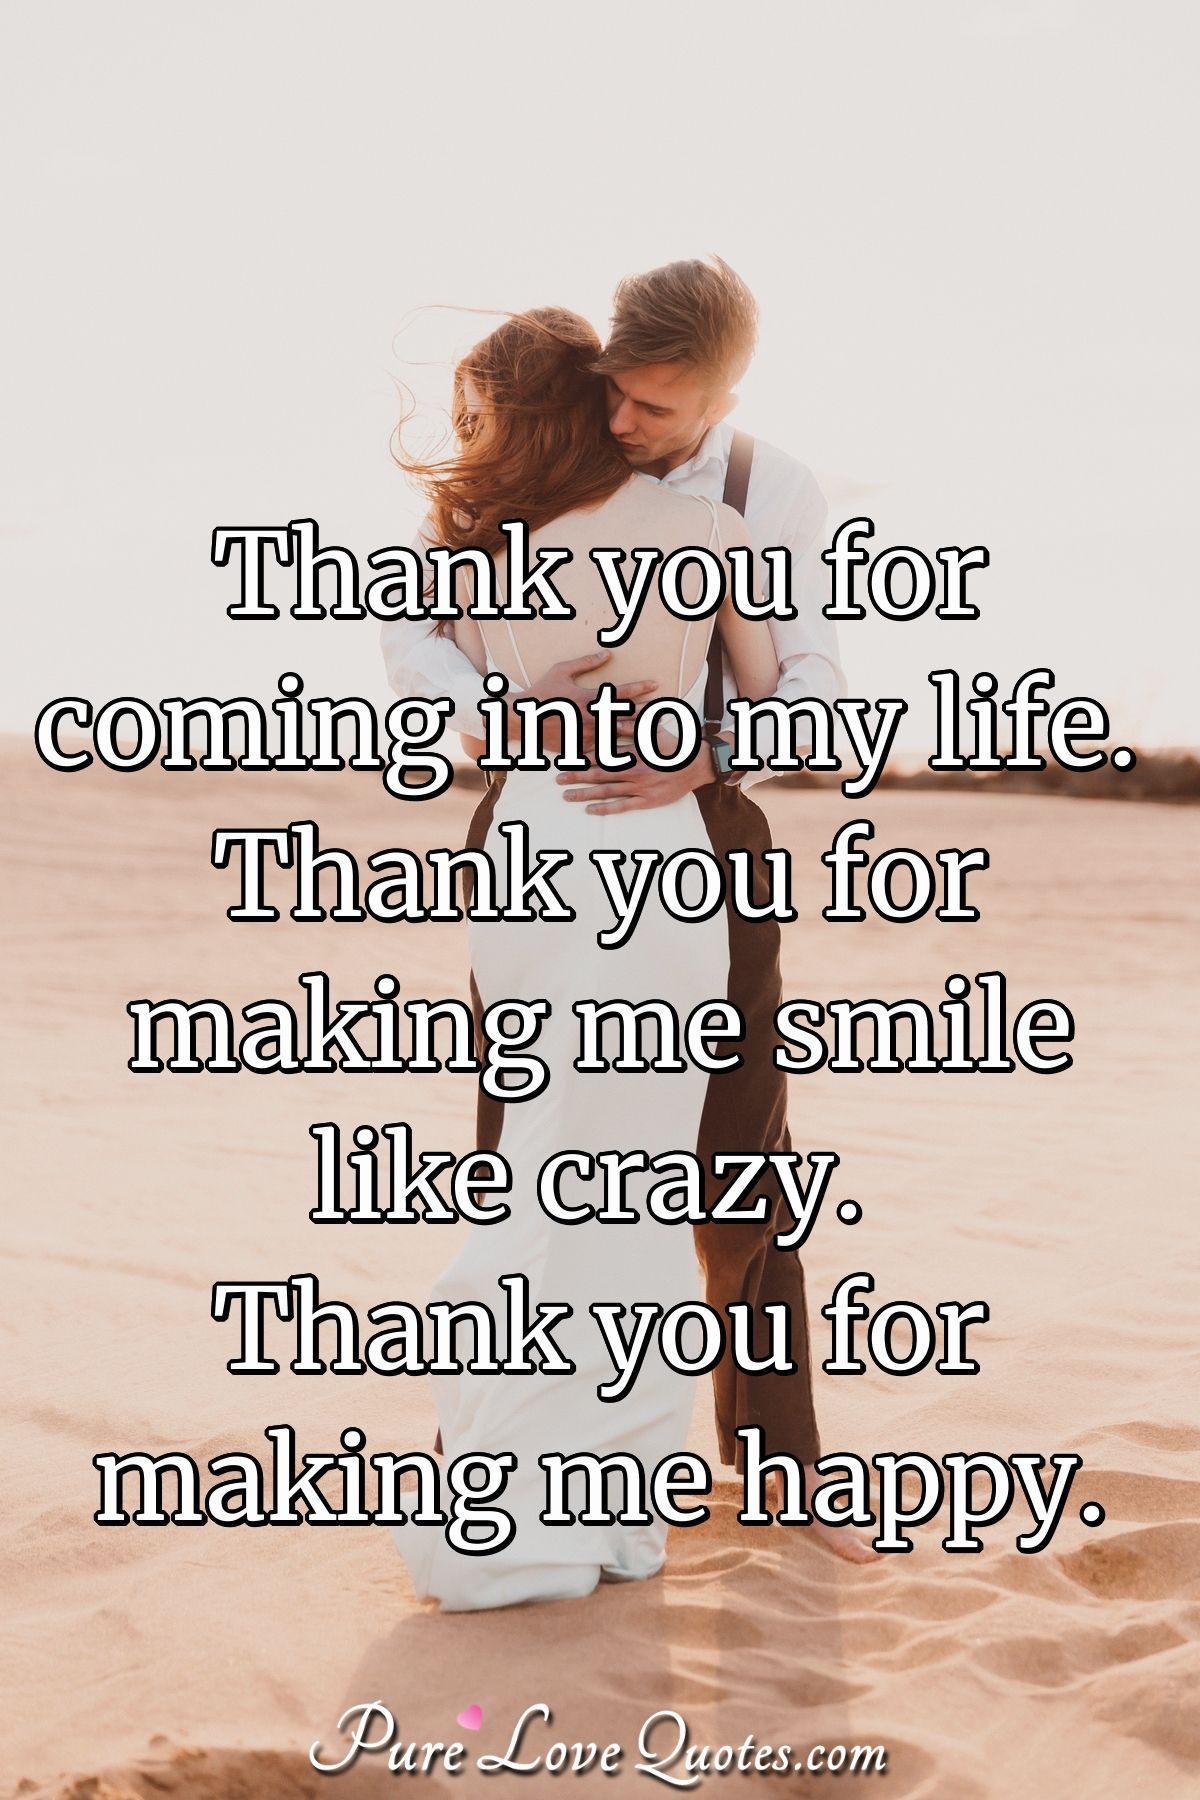 Thank you for coming into my life. Thank you for making me smile like crazy. Thank you for making me happy. - Anonymous